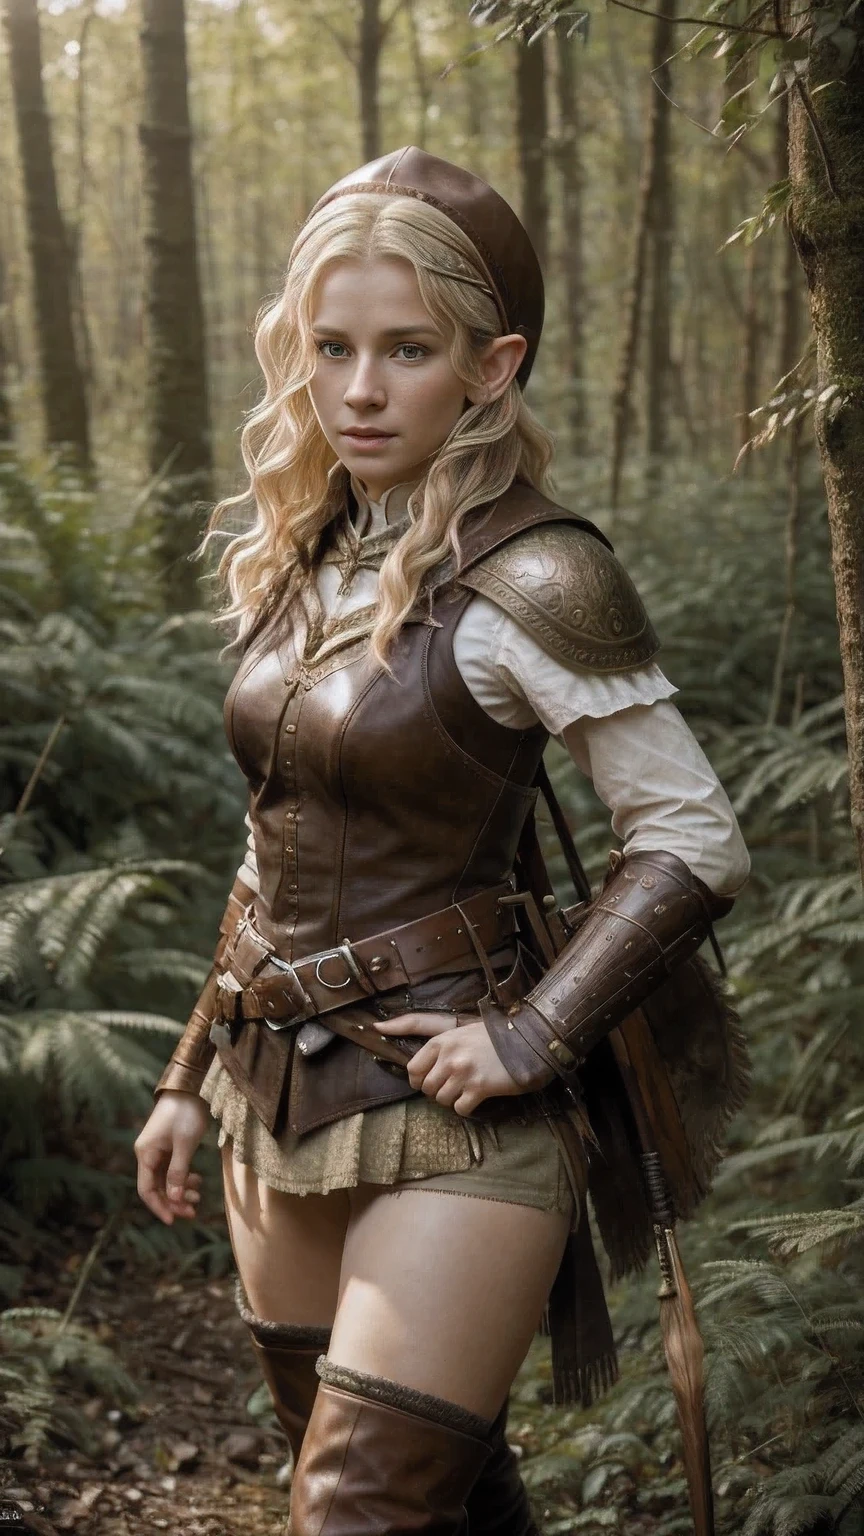 young elf girl : blonde wavy short hair,freckles on the face, on the head is a 16th century hunting hat with a feather on the side, wearing light dark brown leather armor ,Leather Bracers, high leather boots, Tolkien fantasy style, elf, sneaks through the bushes in the forest with a bow at the ready (17th century compound warbow),Edge of the forest,realistic scene, Photorealism,8k rendering,